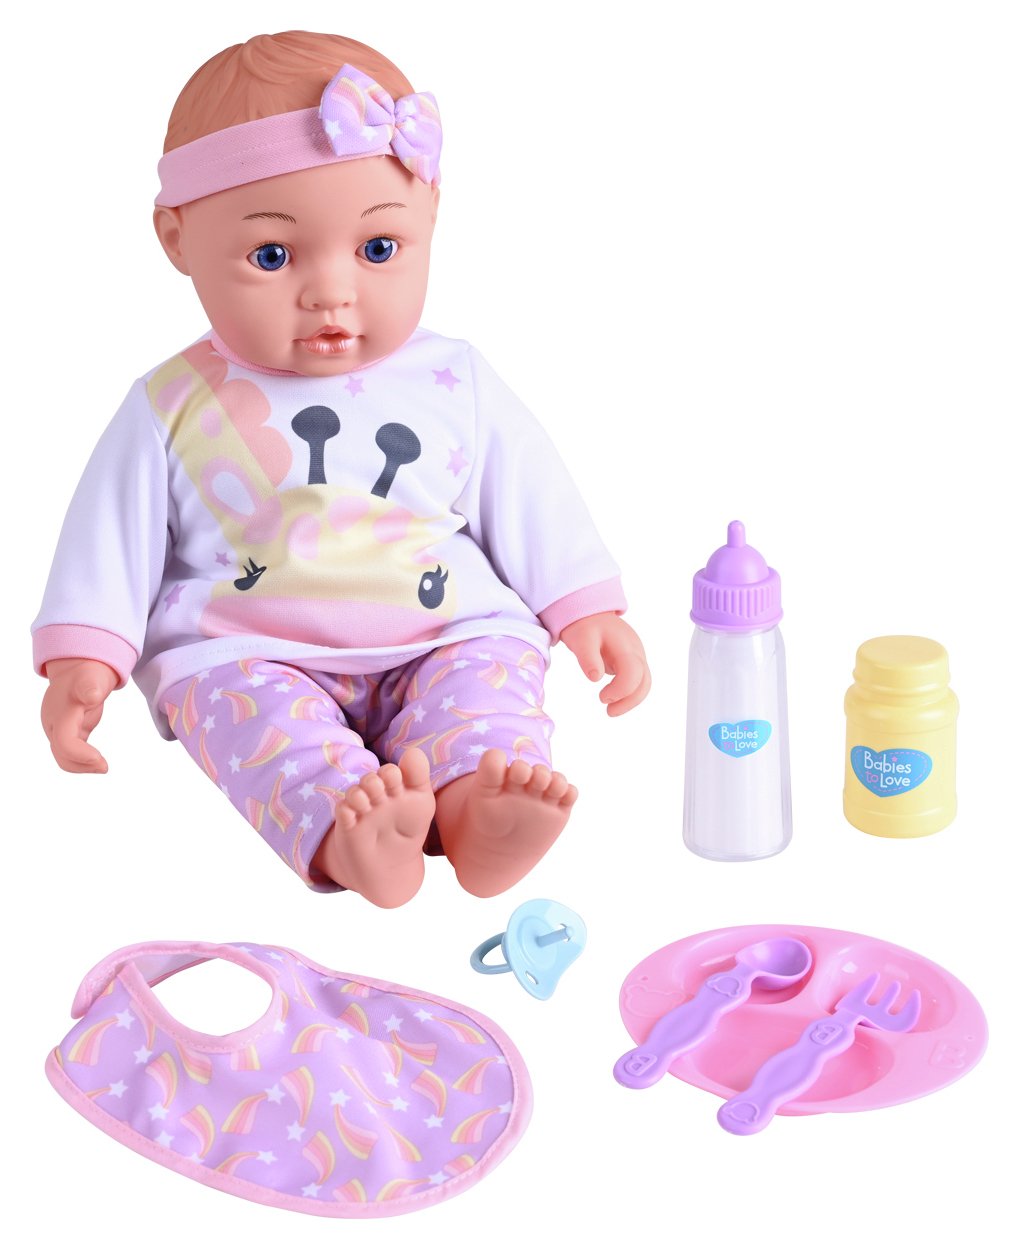 Chad Valley Babies to Love Interactive Isabella Doll - 40cm